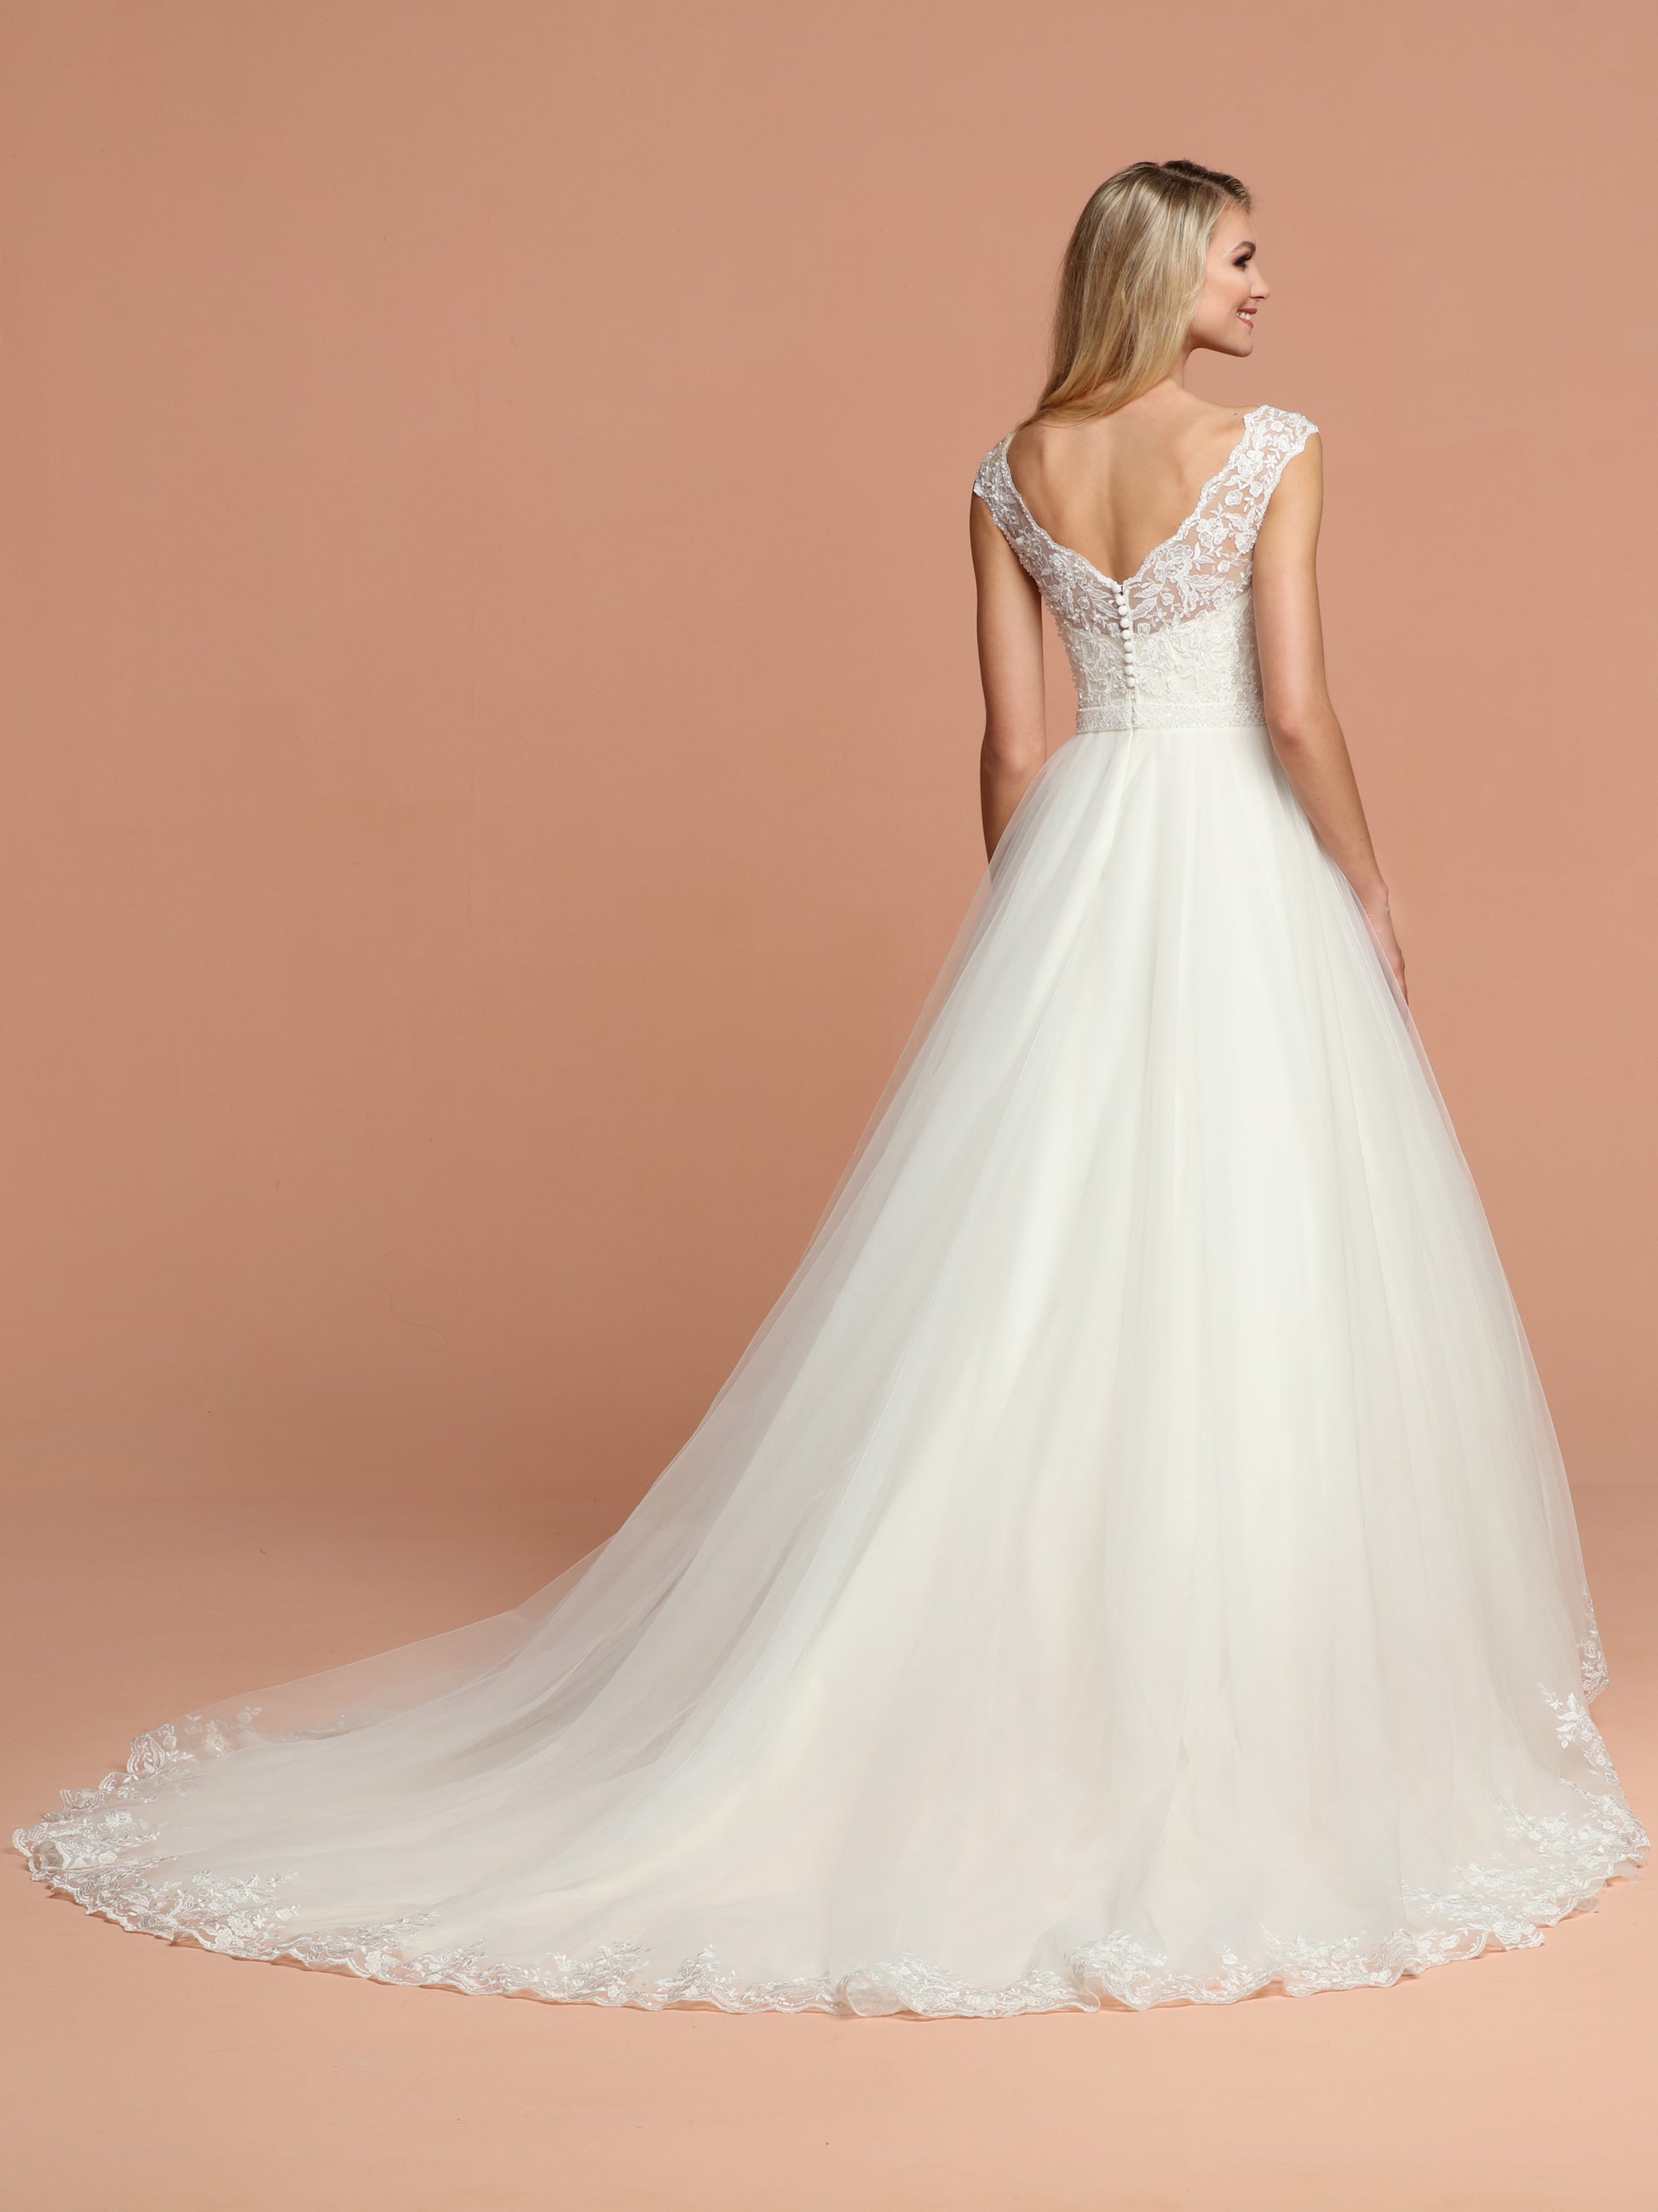 Davinci Bridal 50584 is a Full Tulle Ballgown Wedding Dress with a train. Beautiful Bodice features a sweetheart neckline with a lace illusion v neck and open v back. Embellished attached Waist Belt.  Available for 1-2 Week Delivery!!!  Available Sizes: 2,4,6,8,10,12,14,16,18,20  Available Colors: Ivory  Available Colors: Ivory, Whit